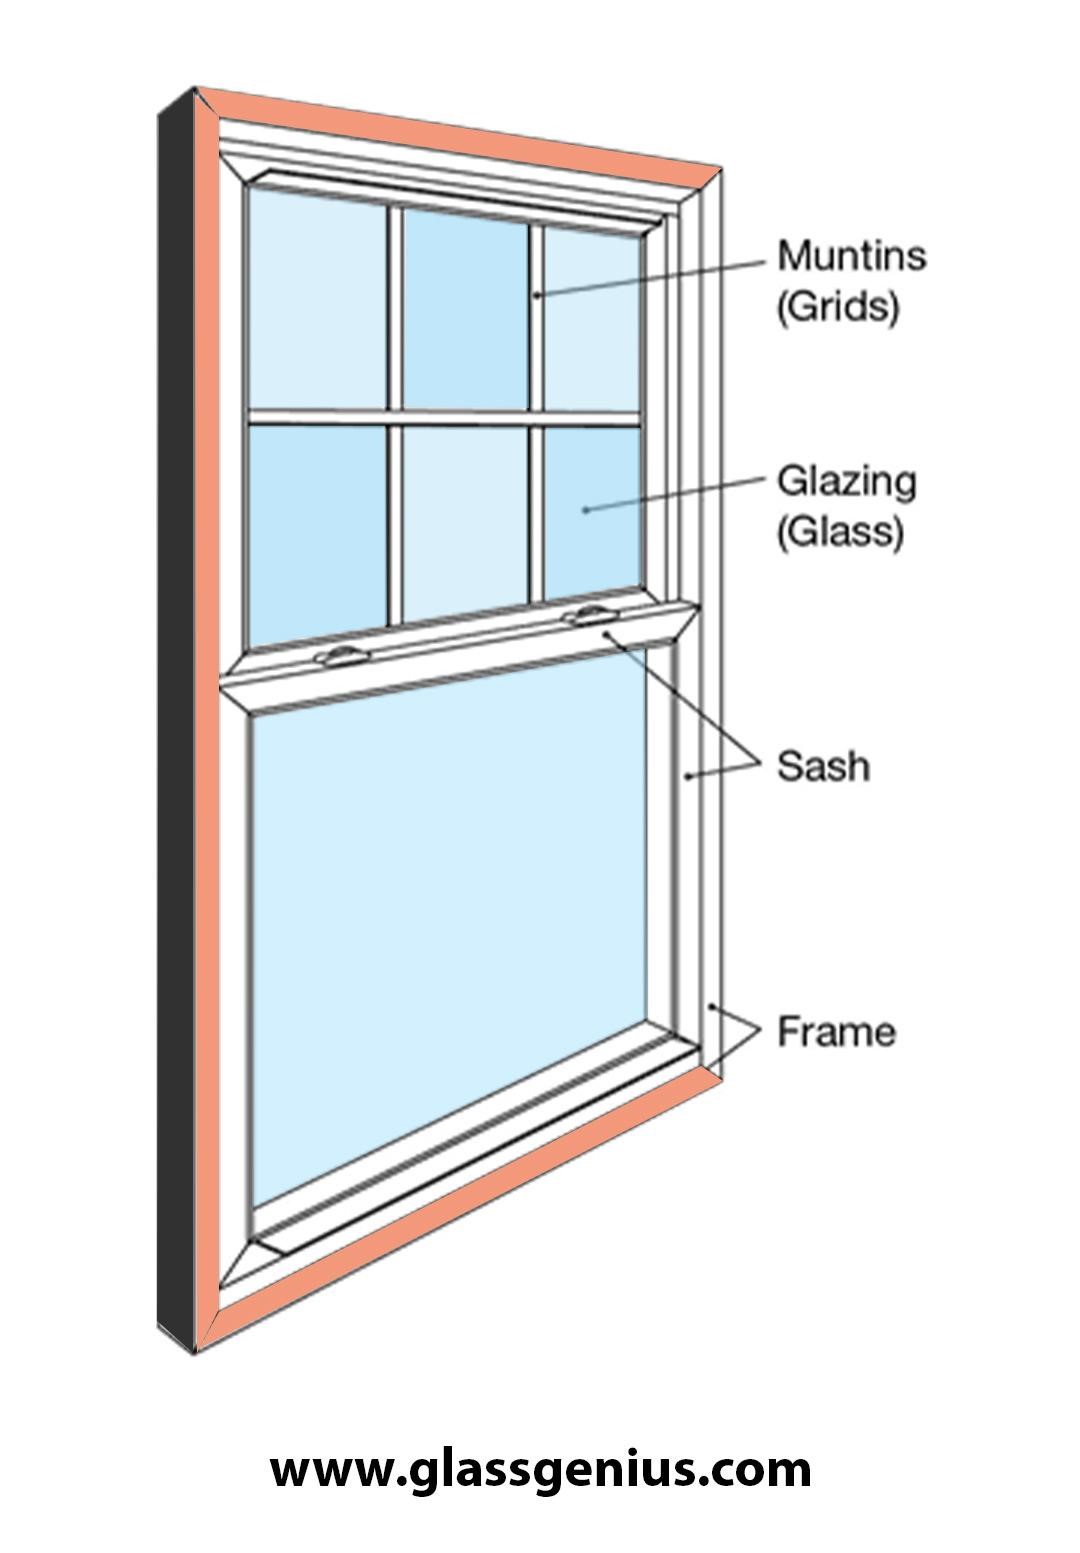 Sash Windows Replacement Guide - Factor To Consider!